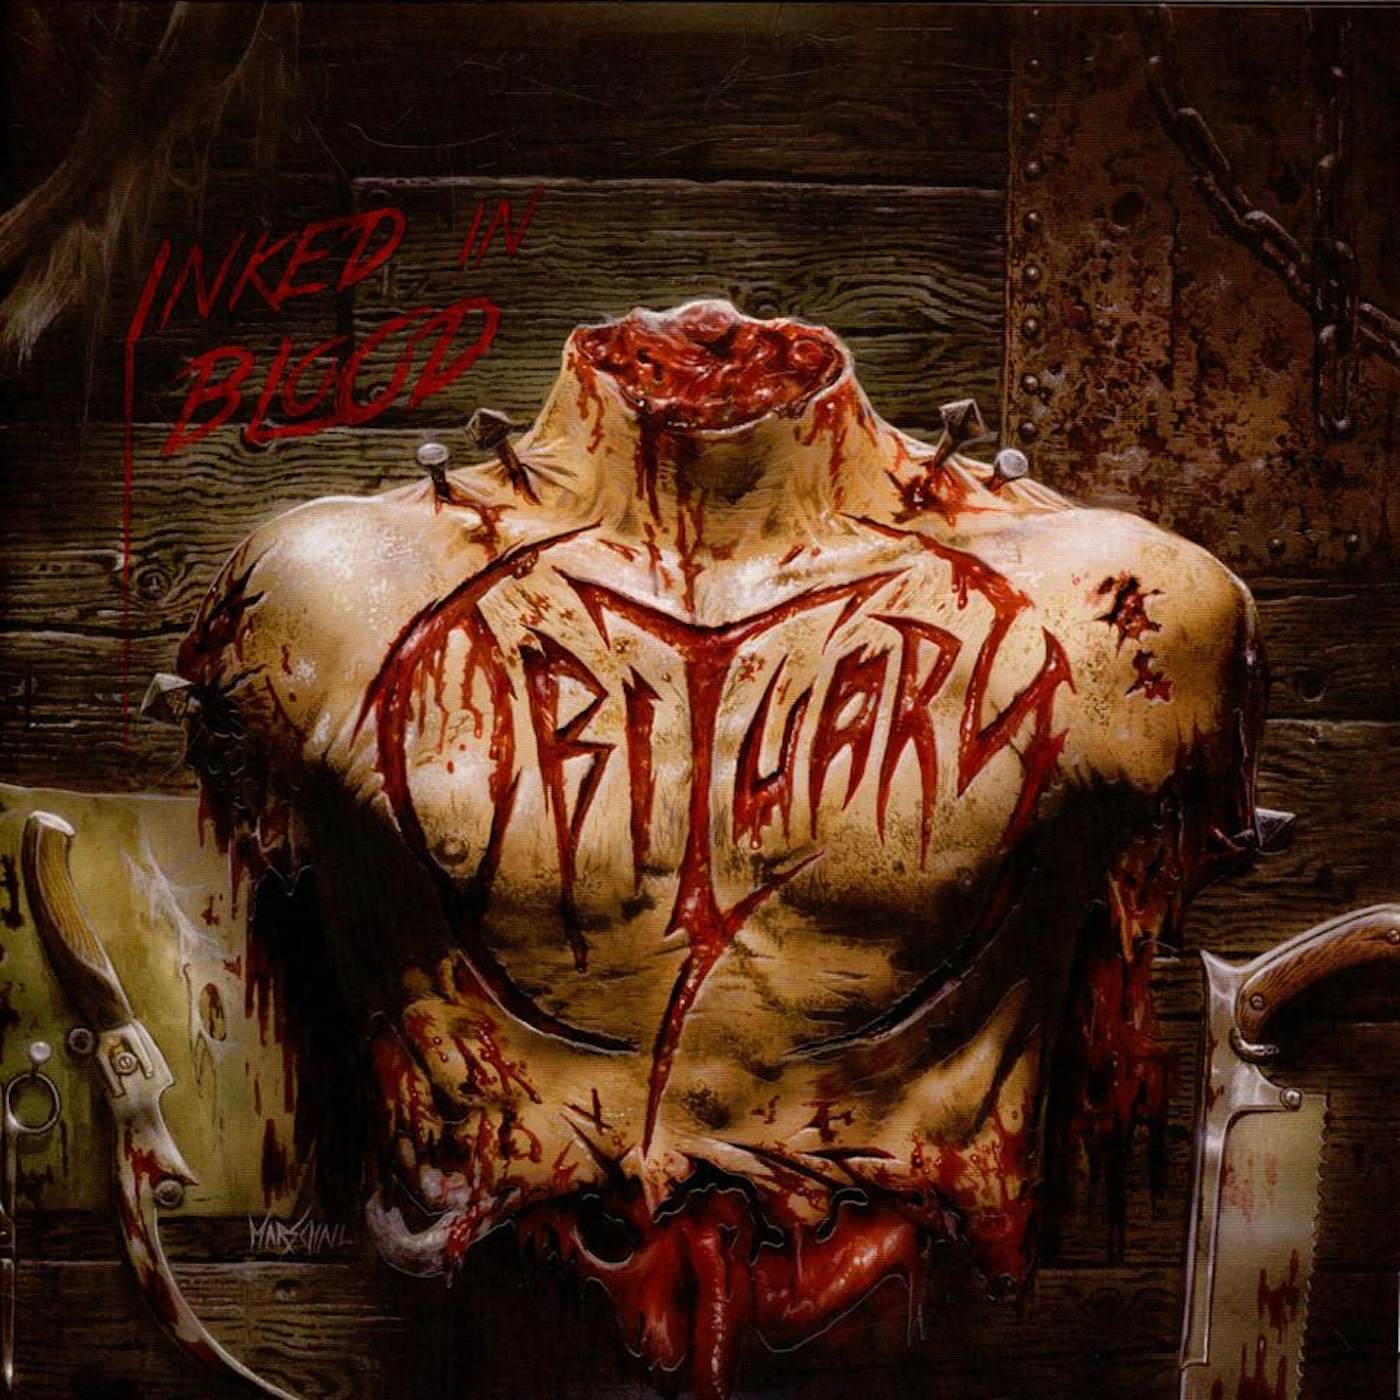 Obituary "Inked In Blood" CD